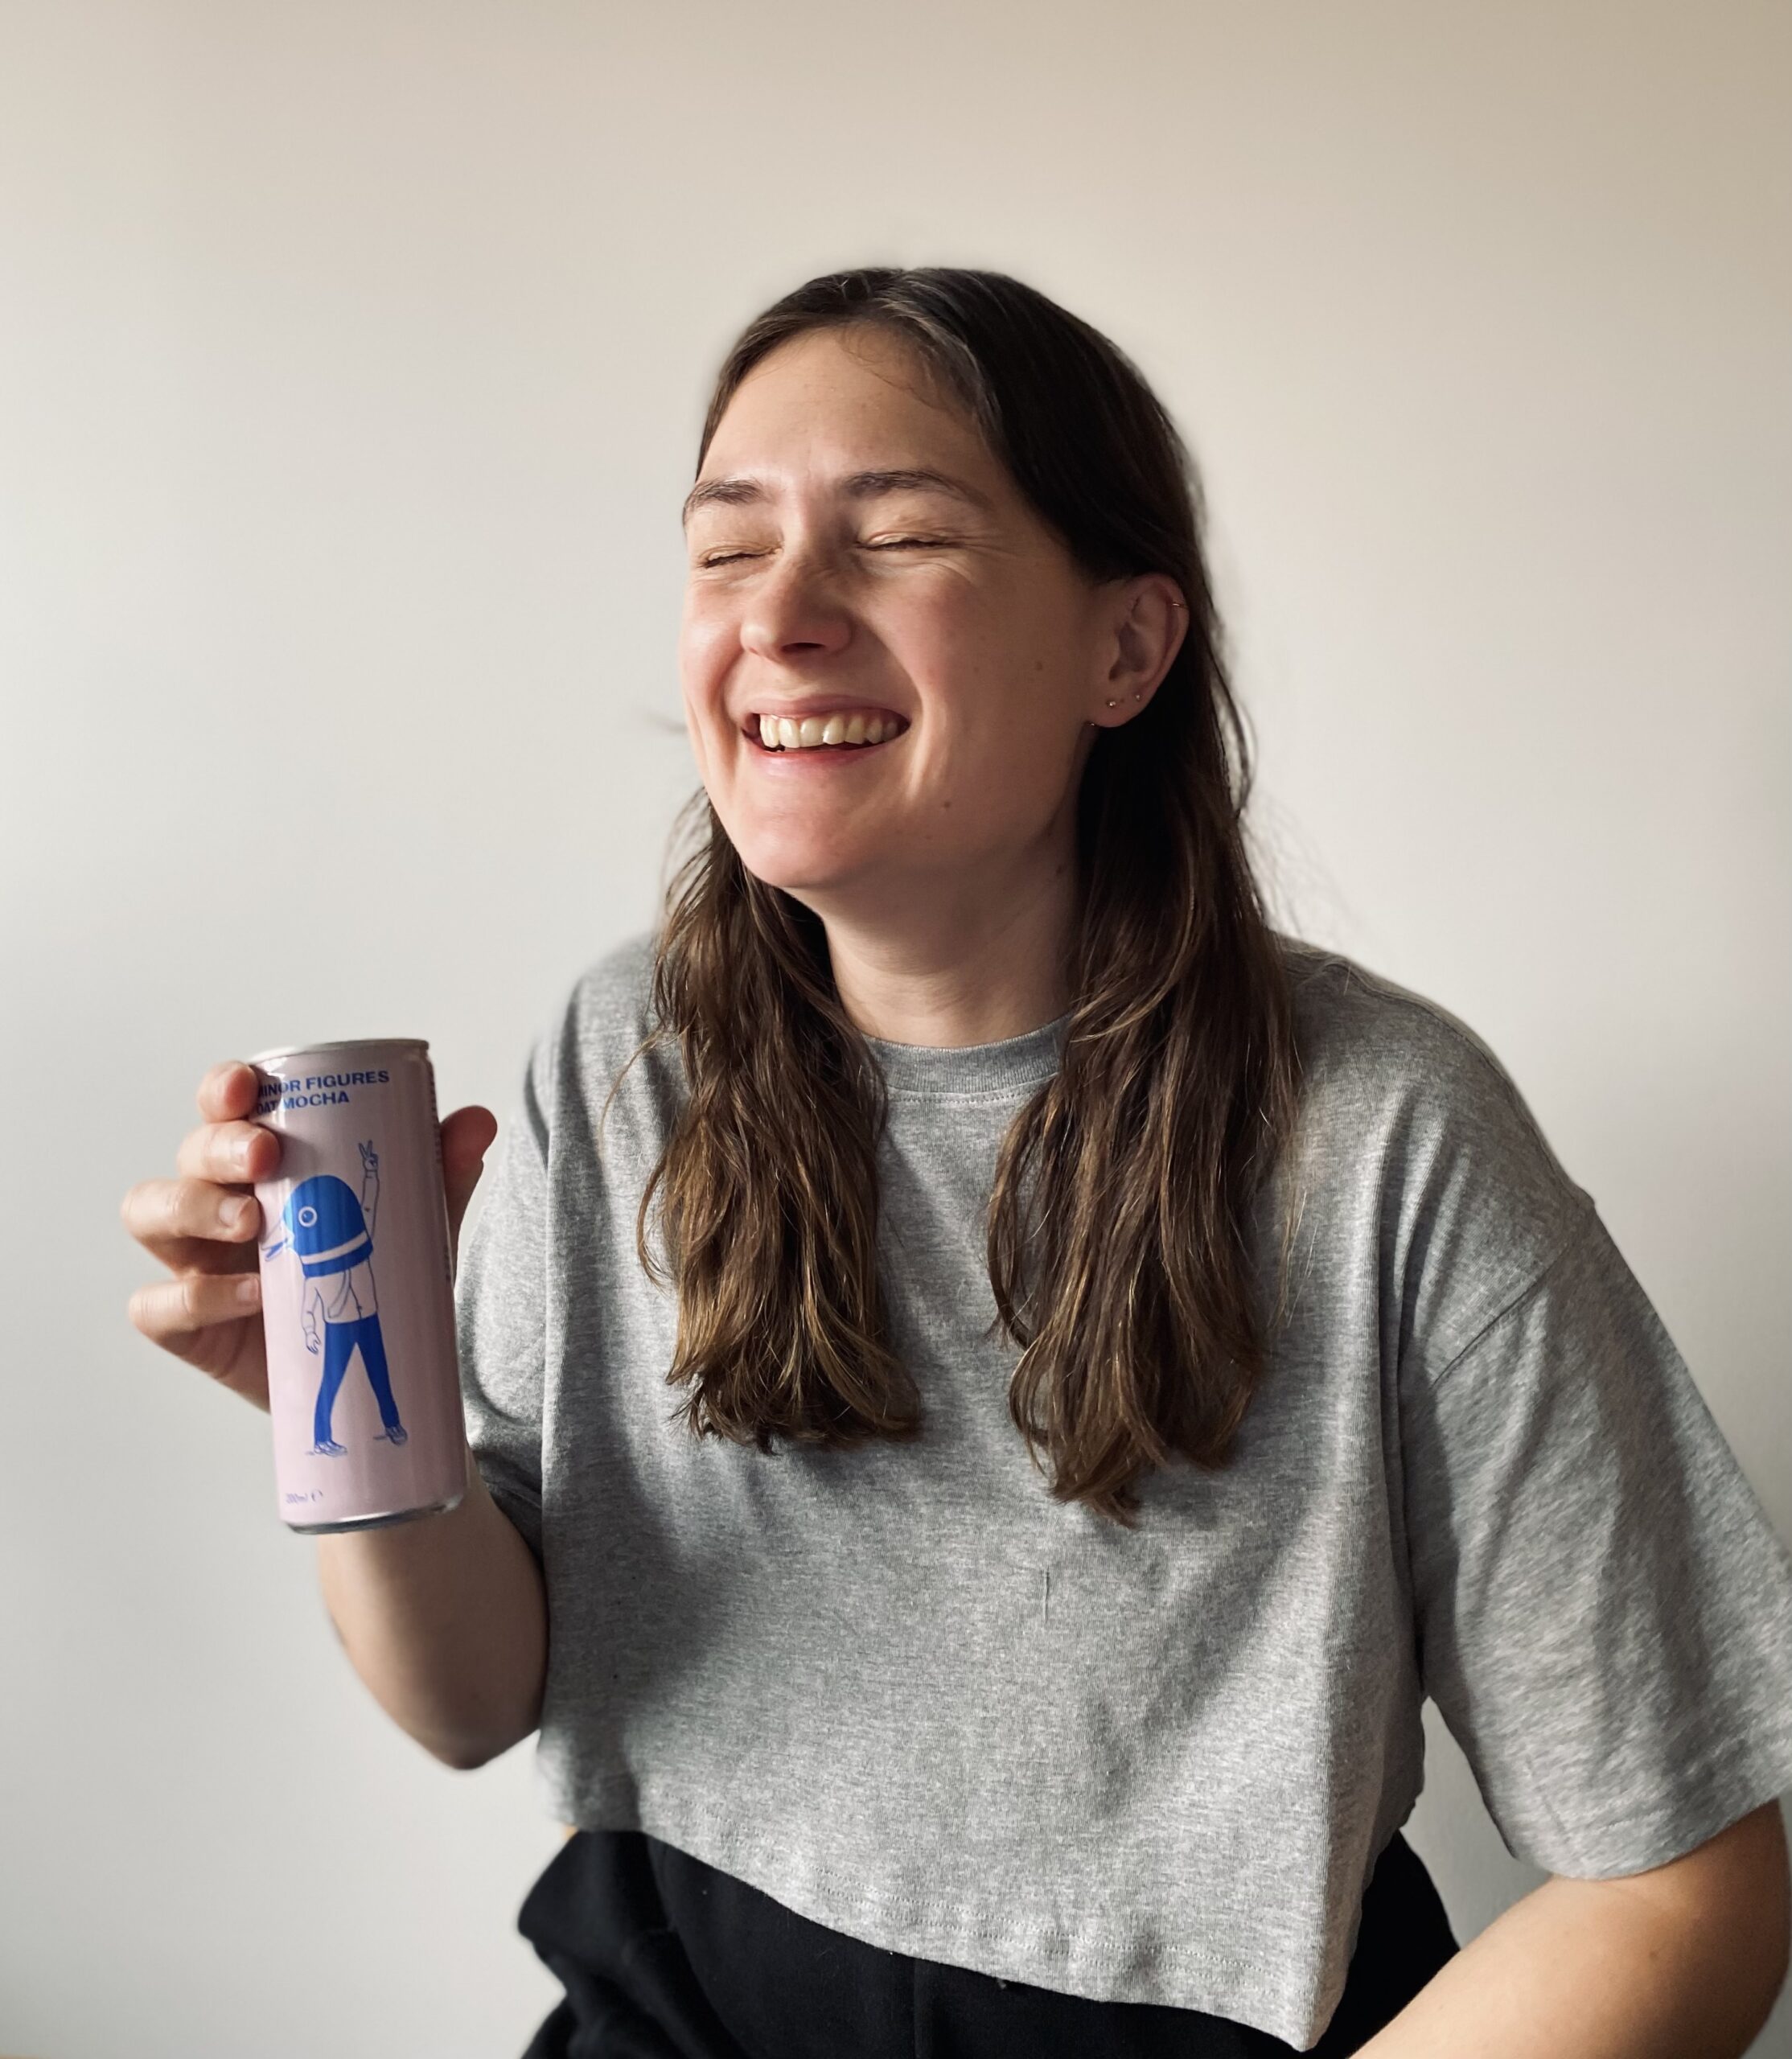 Lucy laughing at the can of Minor Figures cold brew coffee